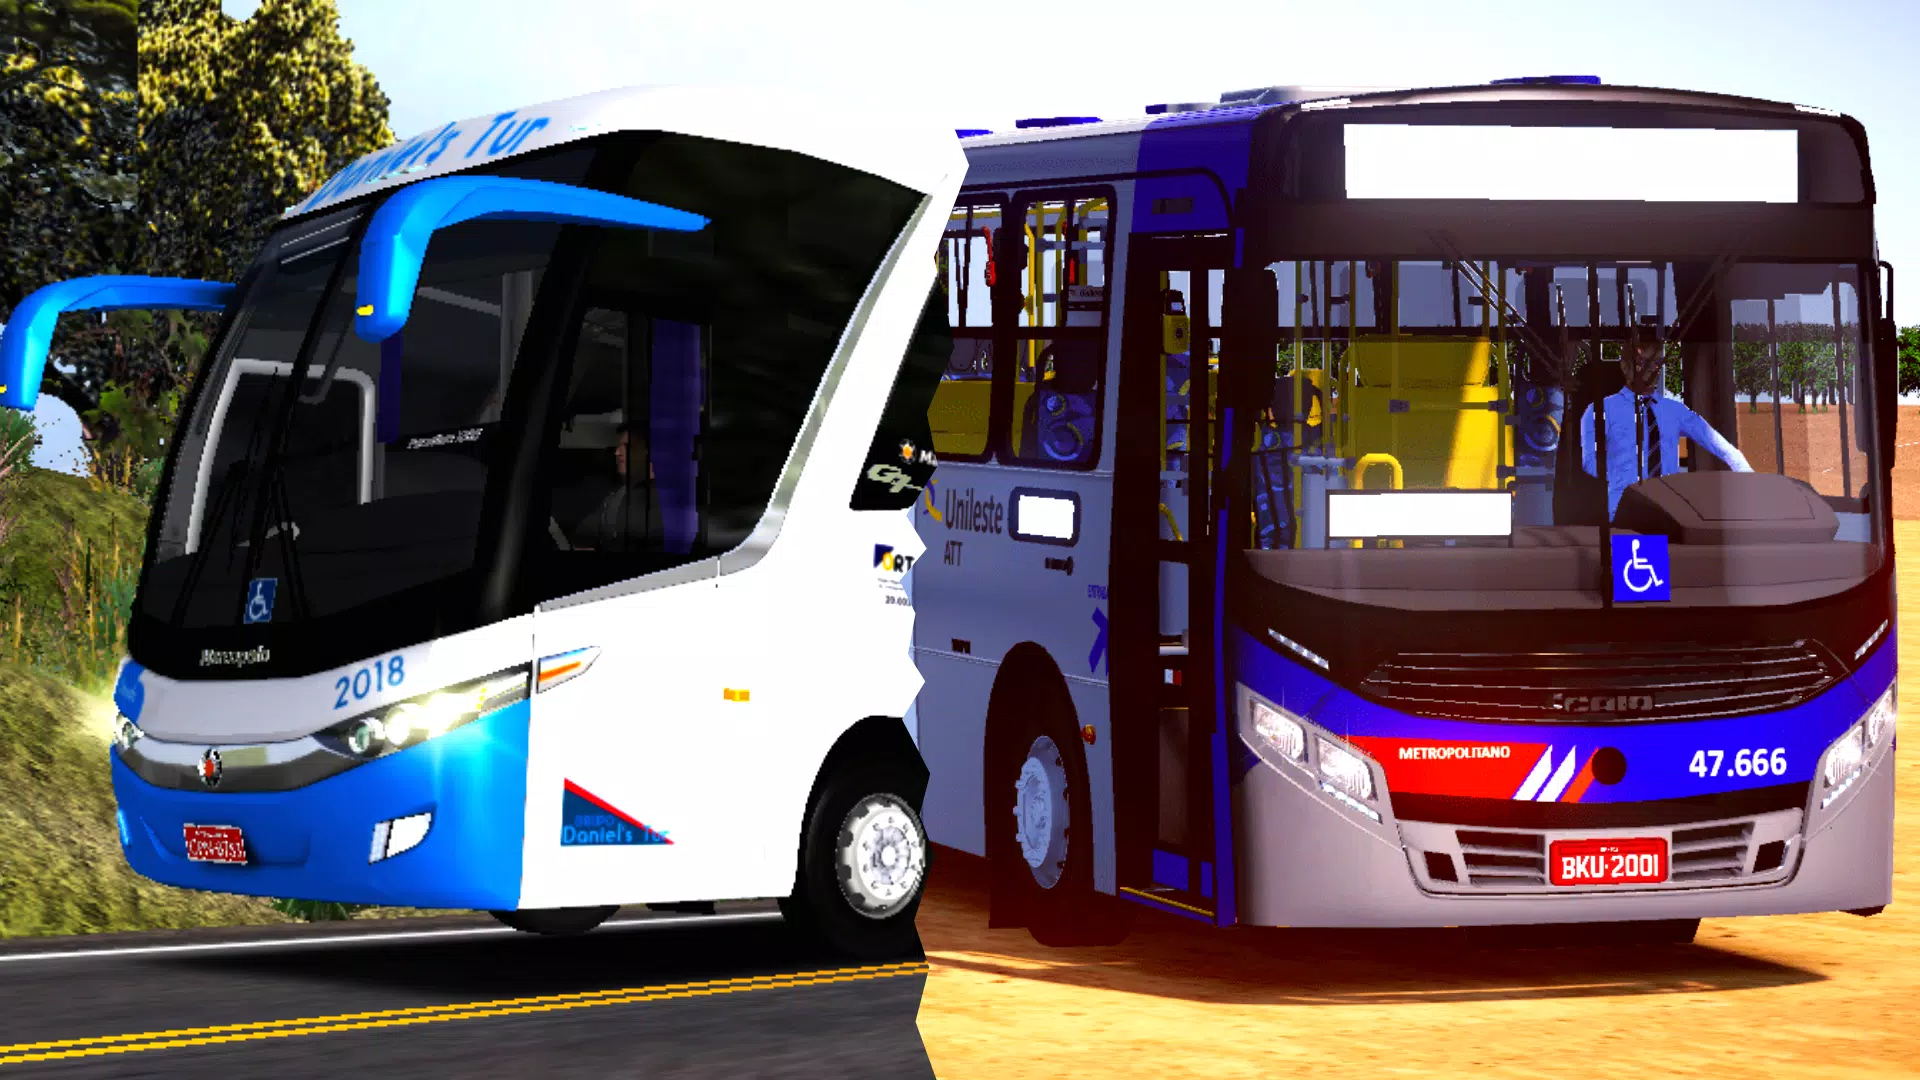 Download Mods - Proton Bus Simulator android on PC